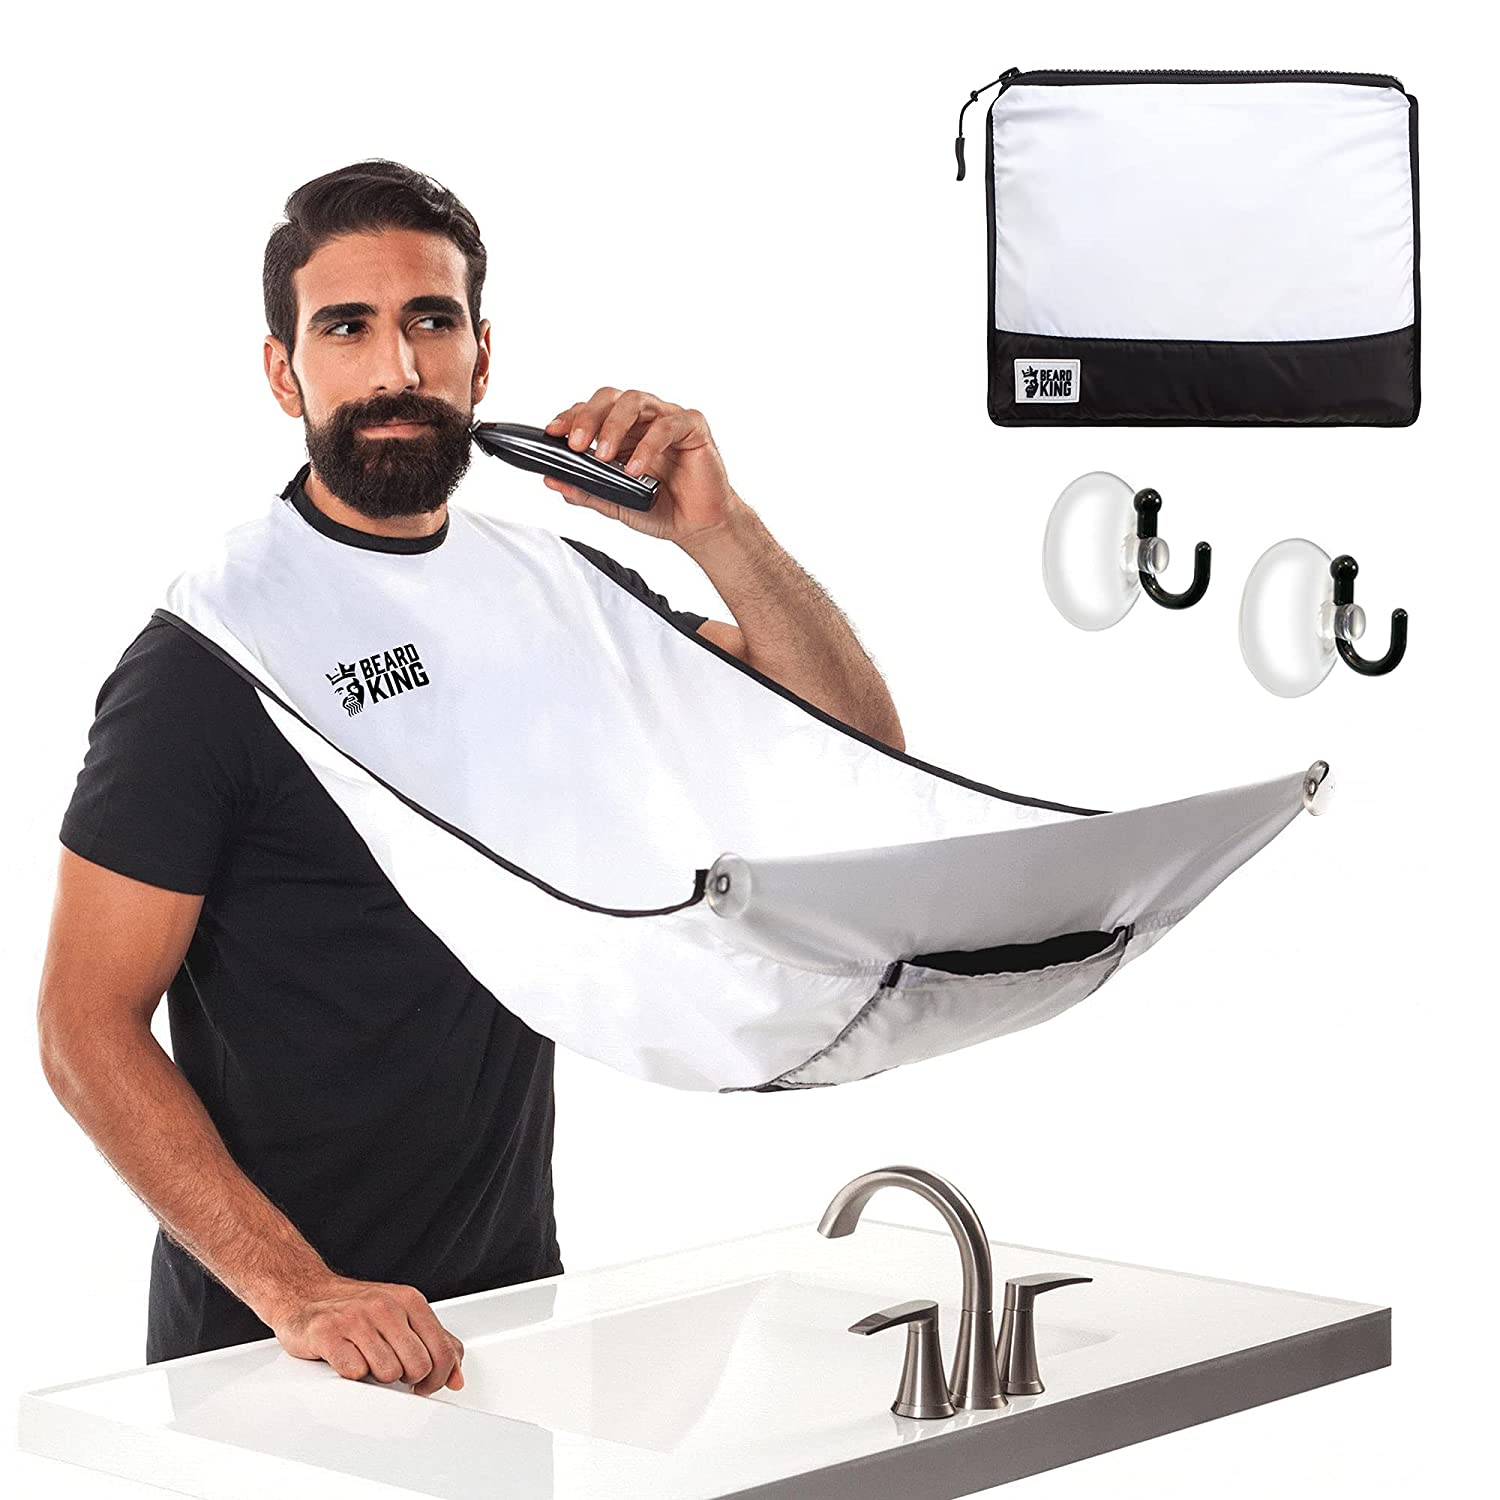 Beard King, The Official Beard Bib, Hair Clippings Catcher & Grooming Cape Apron, White - image 1 of 9